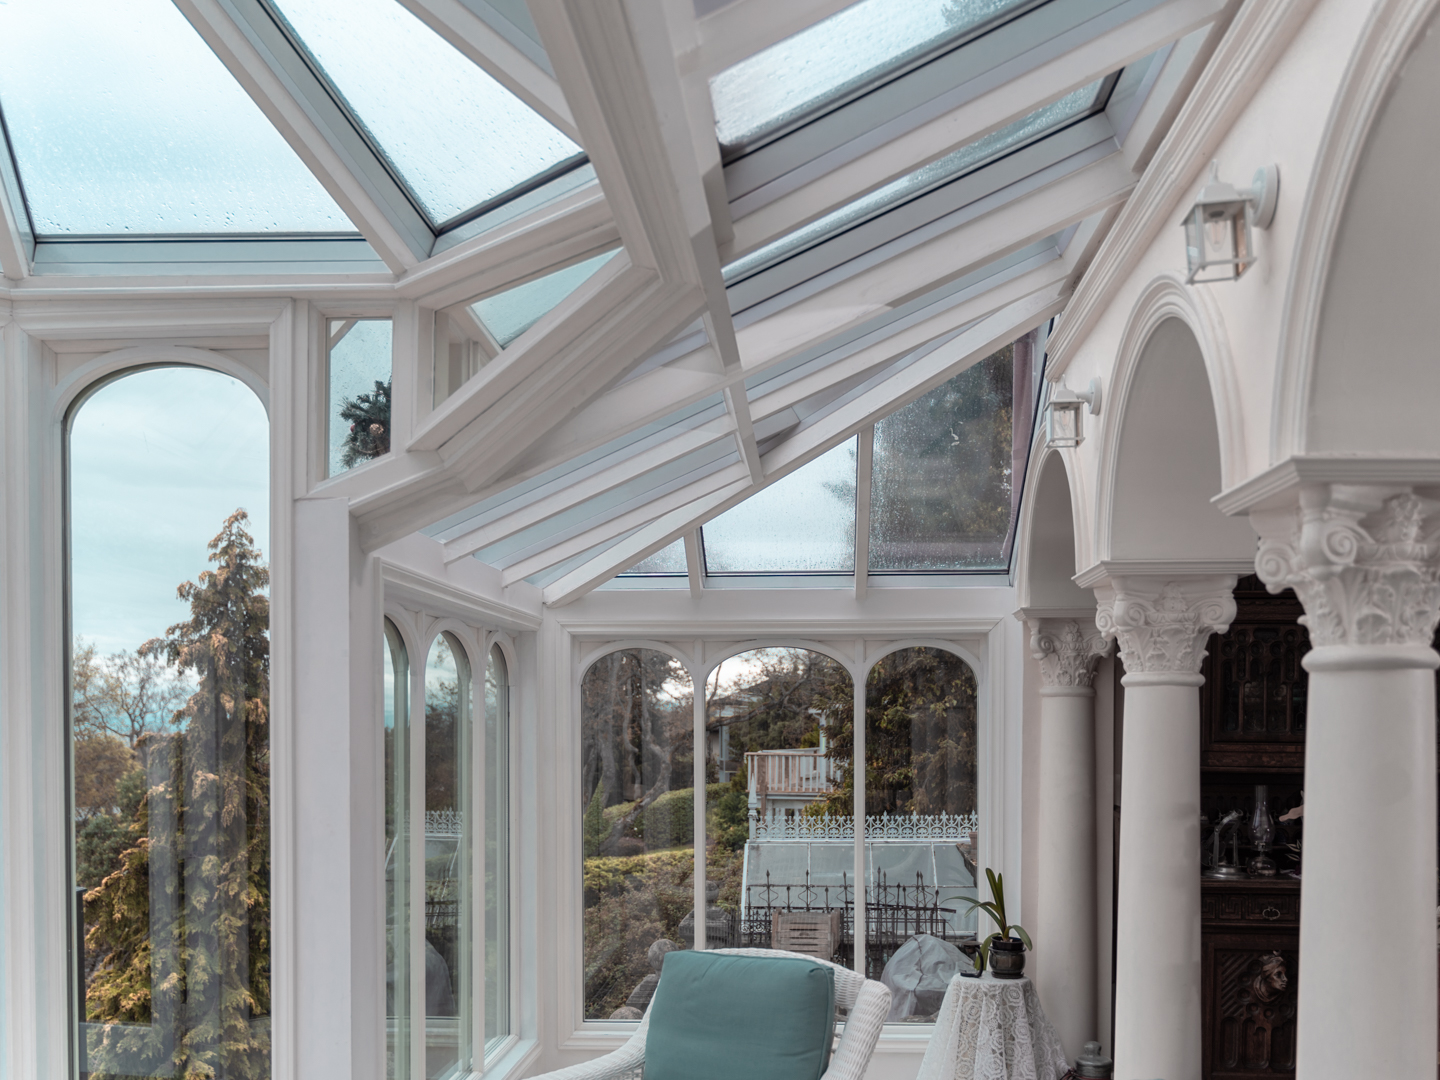 Sunroom with arched columns and windows with a view of the water